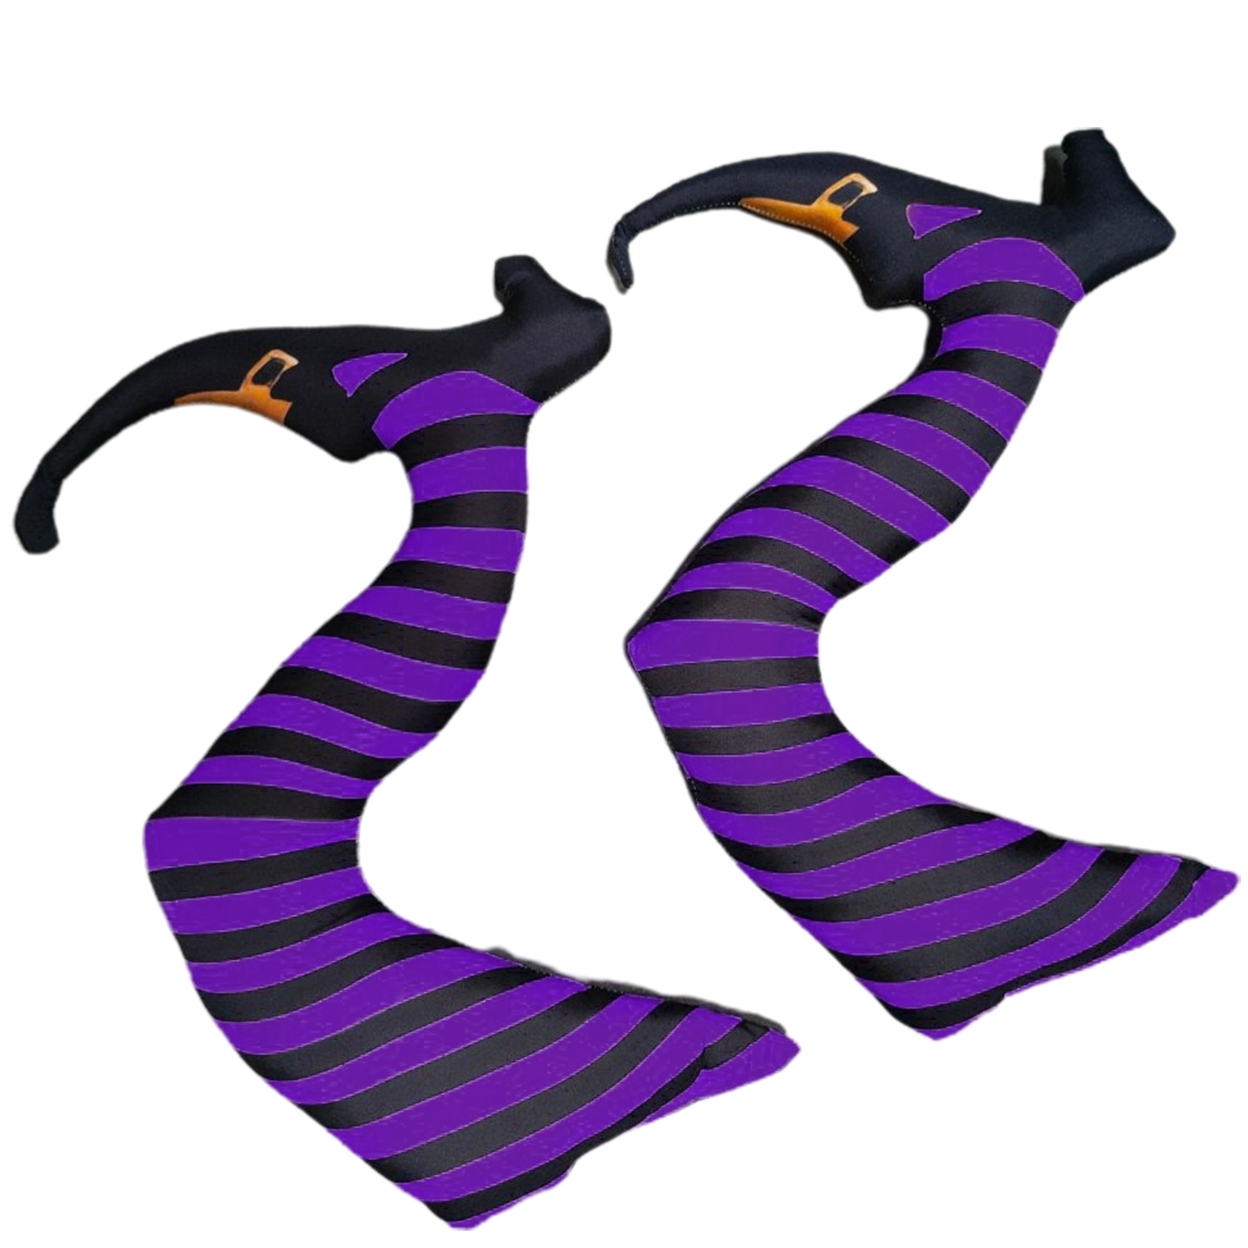 1 Pair Witch Legs Vibrant Color Ornamental Fabric Holiday Striped Legs Decorations Home Decor - purple black